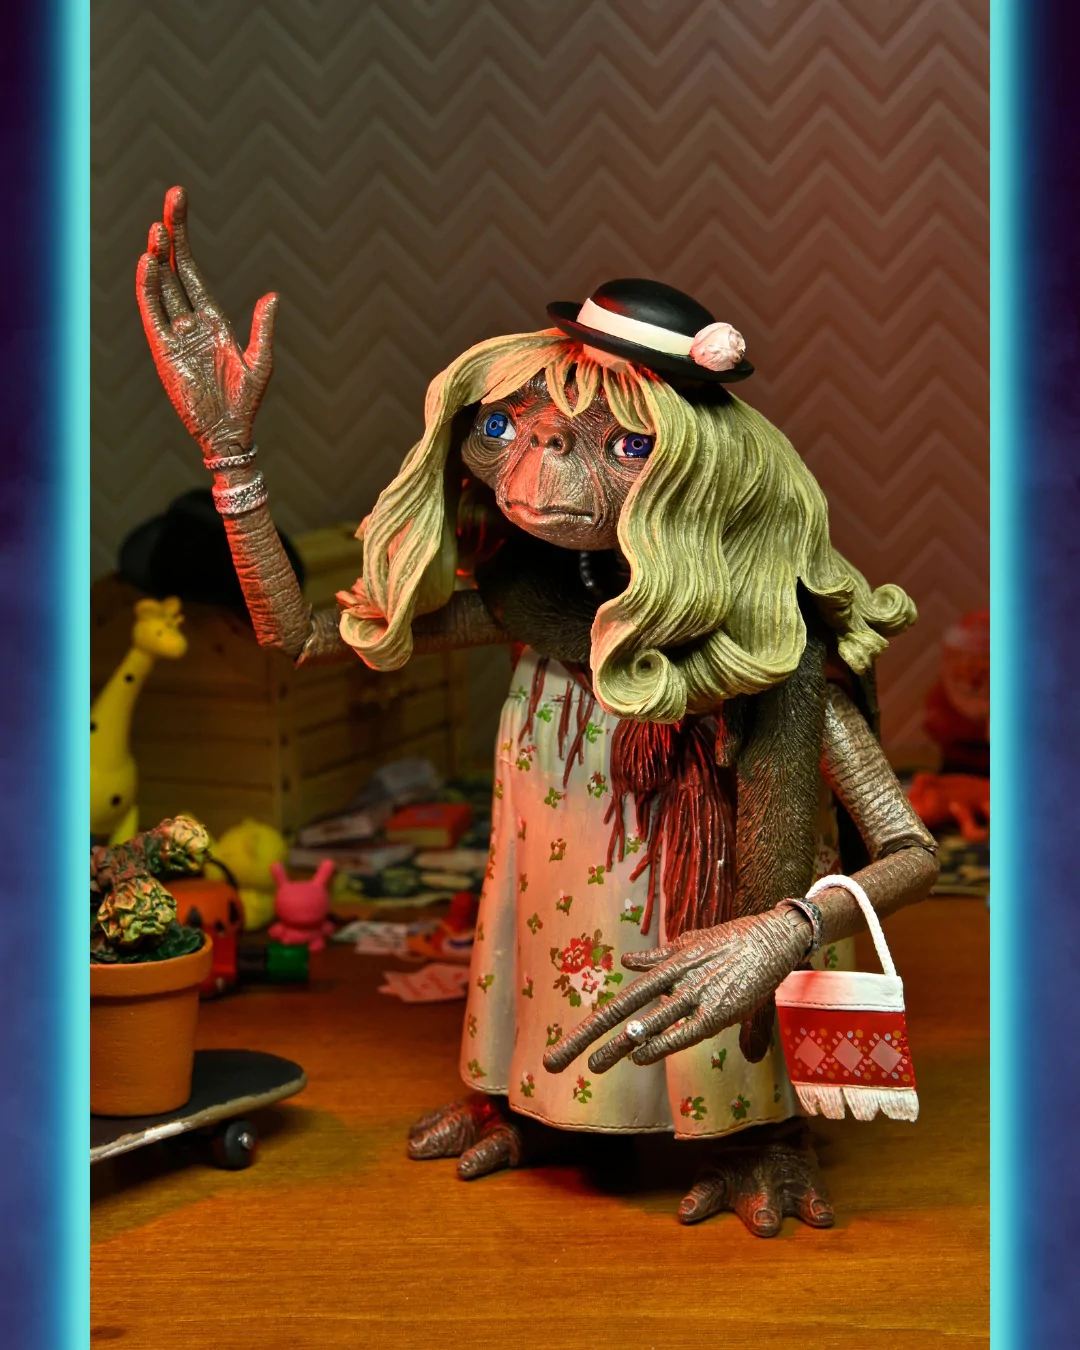 E.T. The Extra-Terrestrial 40th Anniversary Ultimate Dress Up E.T.